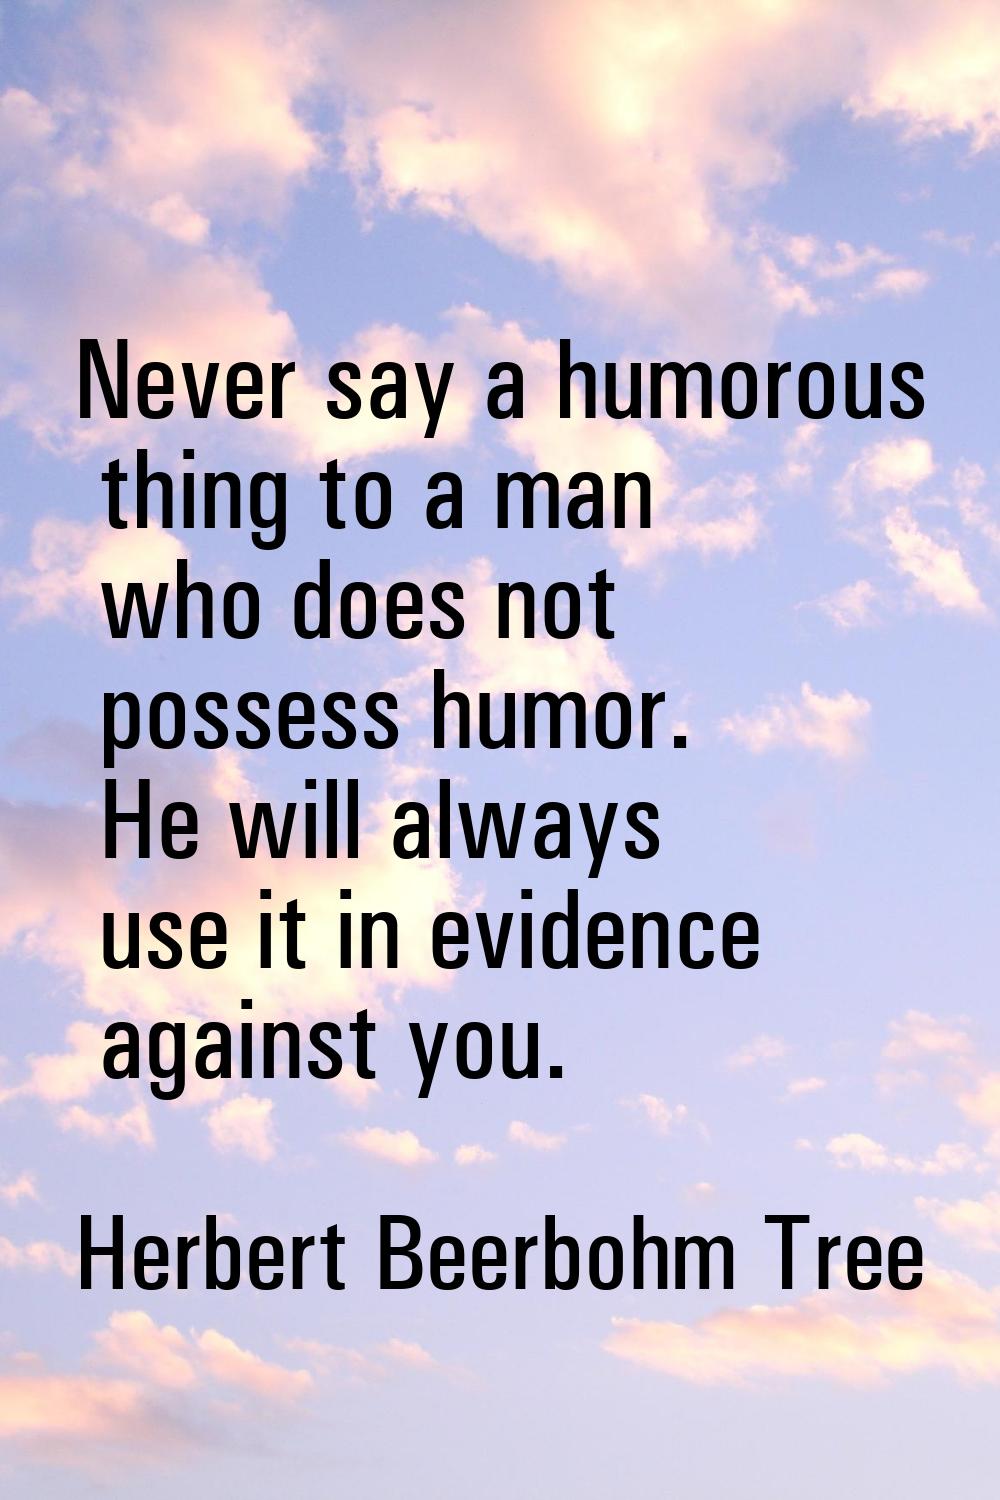 Never say a humorous thing to a man who does not possess humor. He will always use it in evidence a